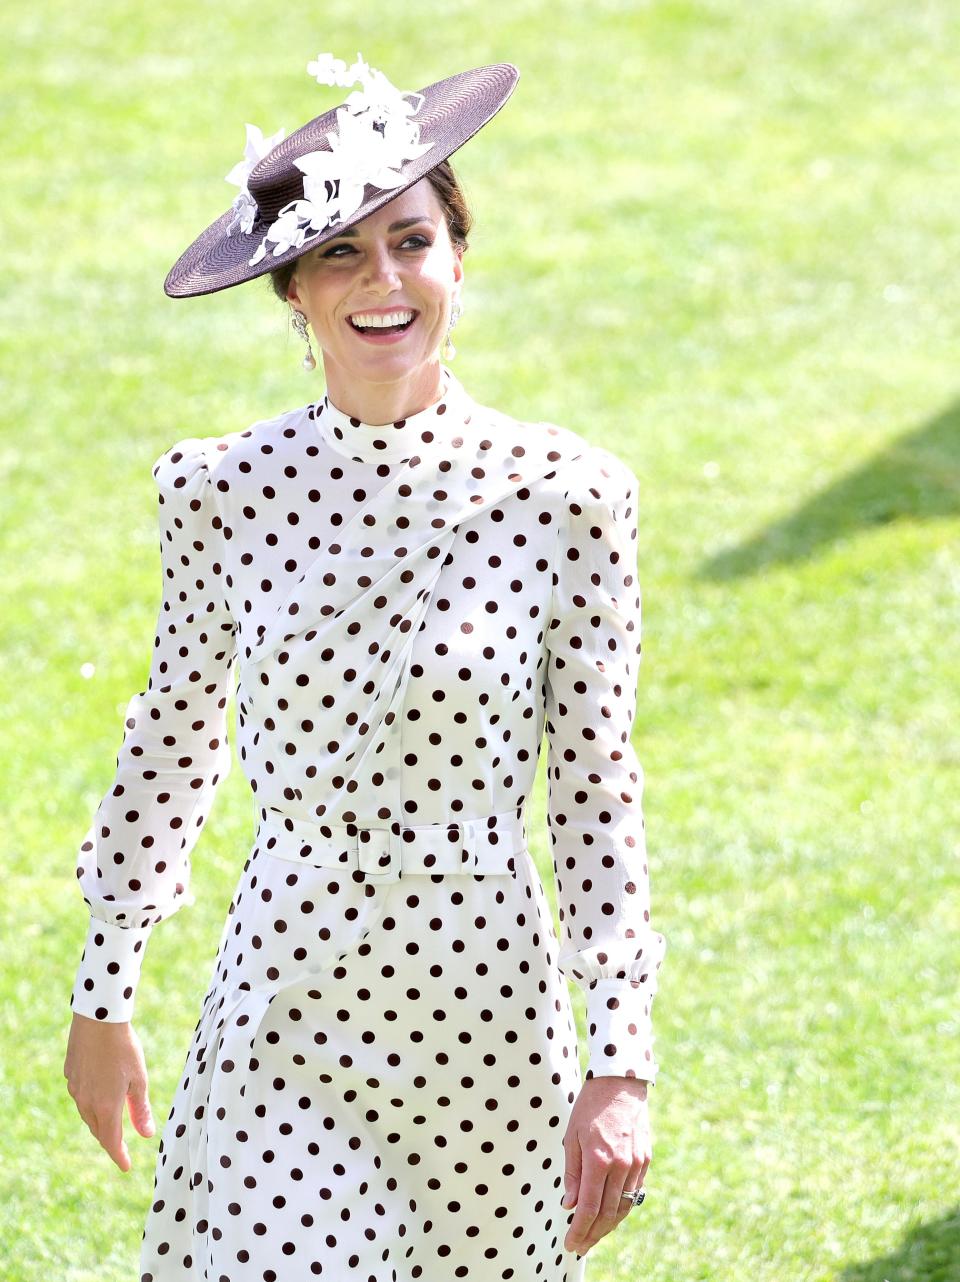 Kate Middleton smiling in a hat and white polka-dot dress